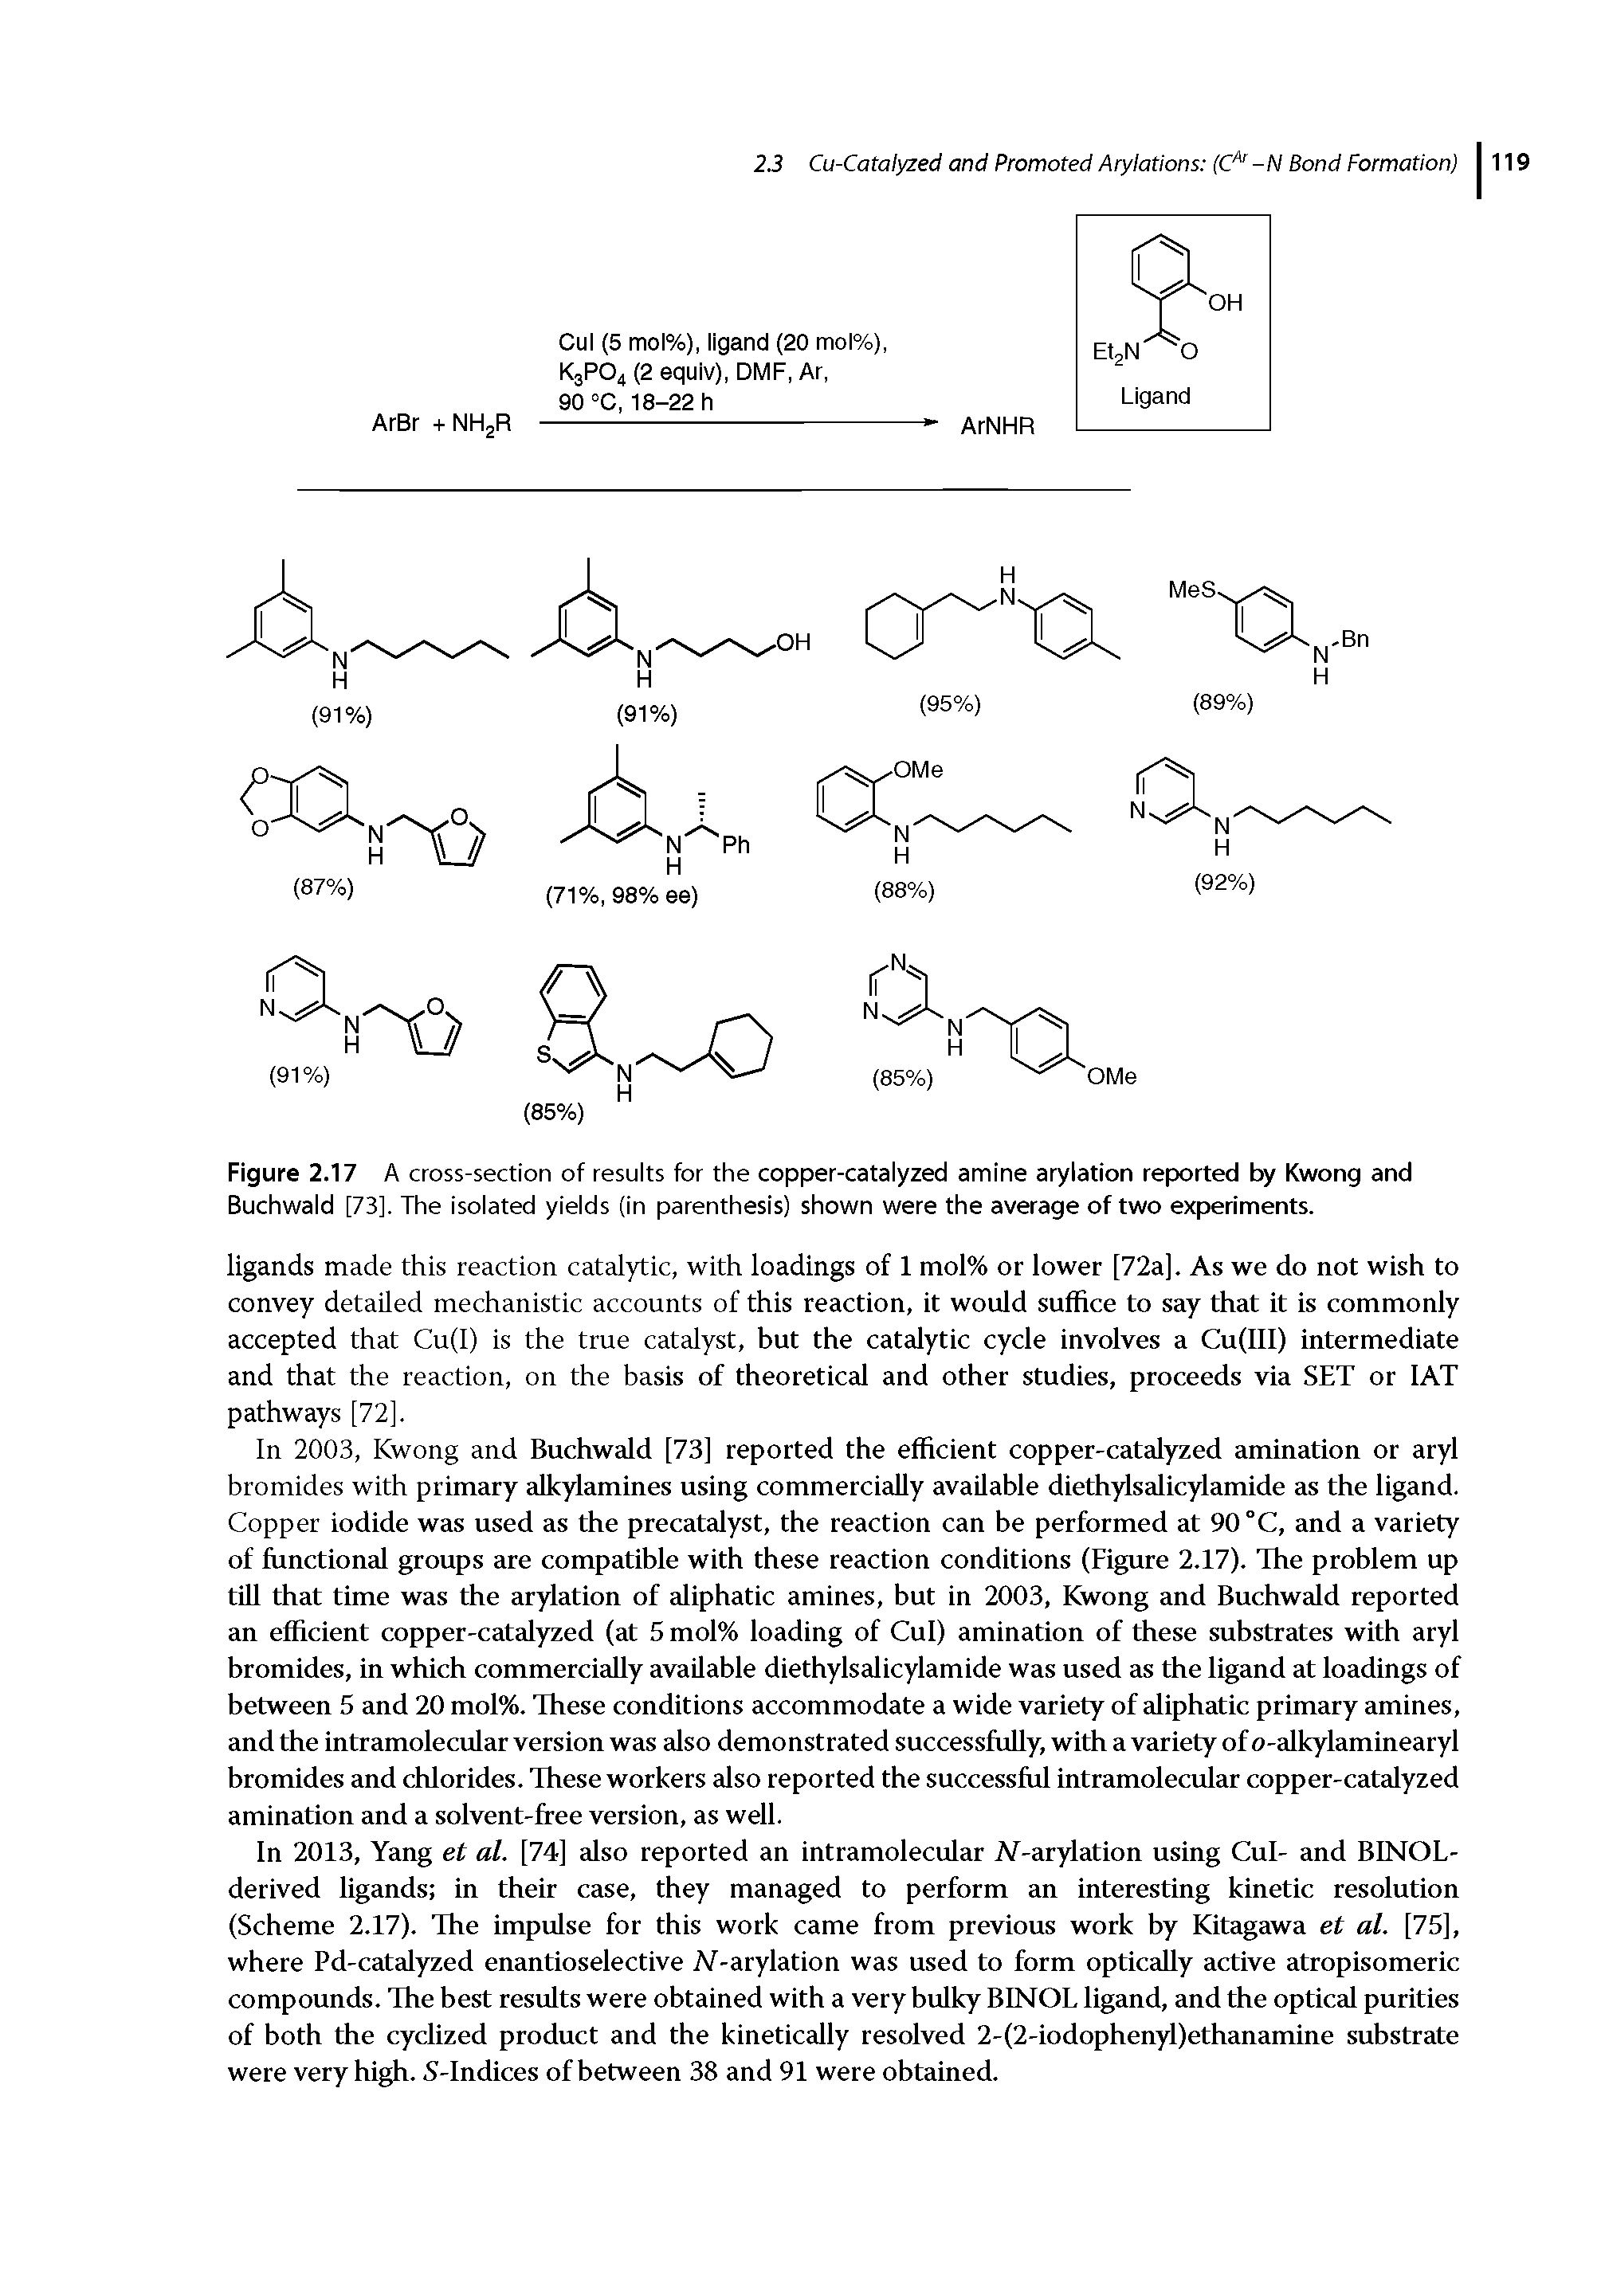 Figure 2.17 A cross-section of results for the copper-catalyzed amine arylation reported by Kwong and Buchwald [73]. The isolated yields (in parenthesis) shown were the average of two experiments.